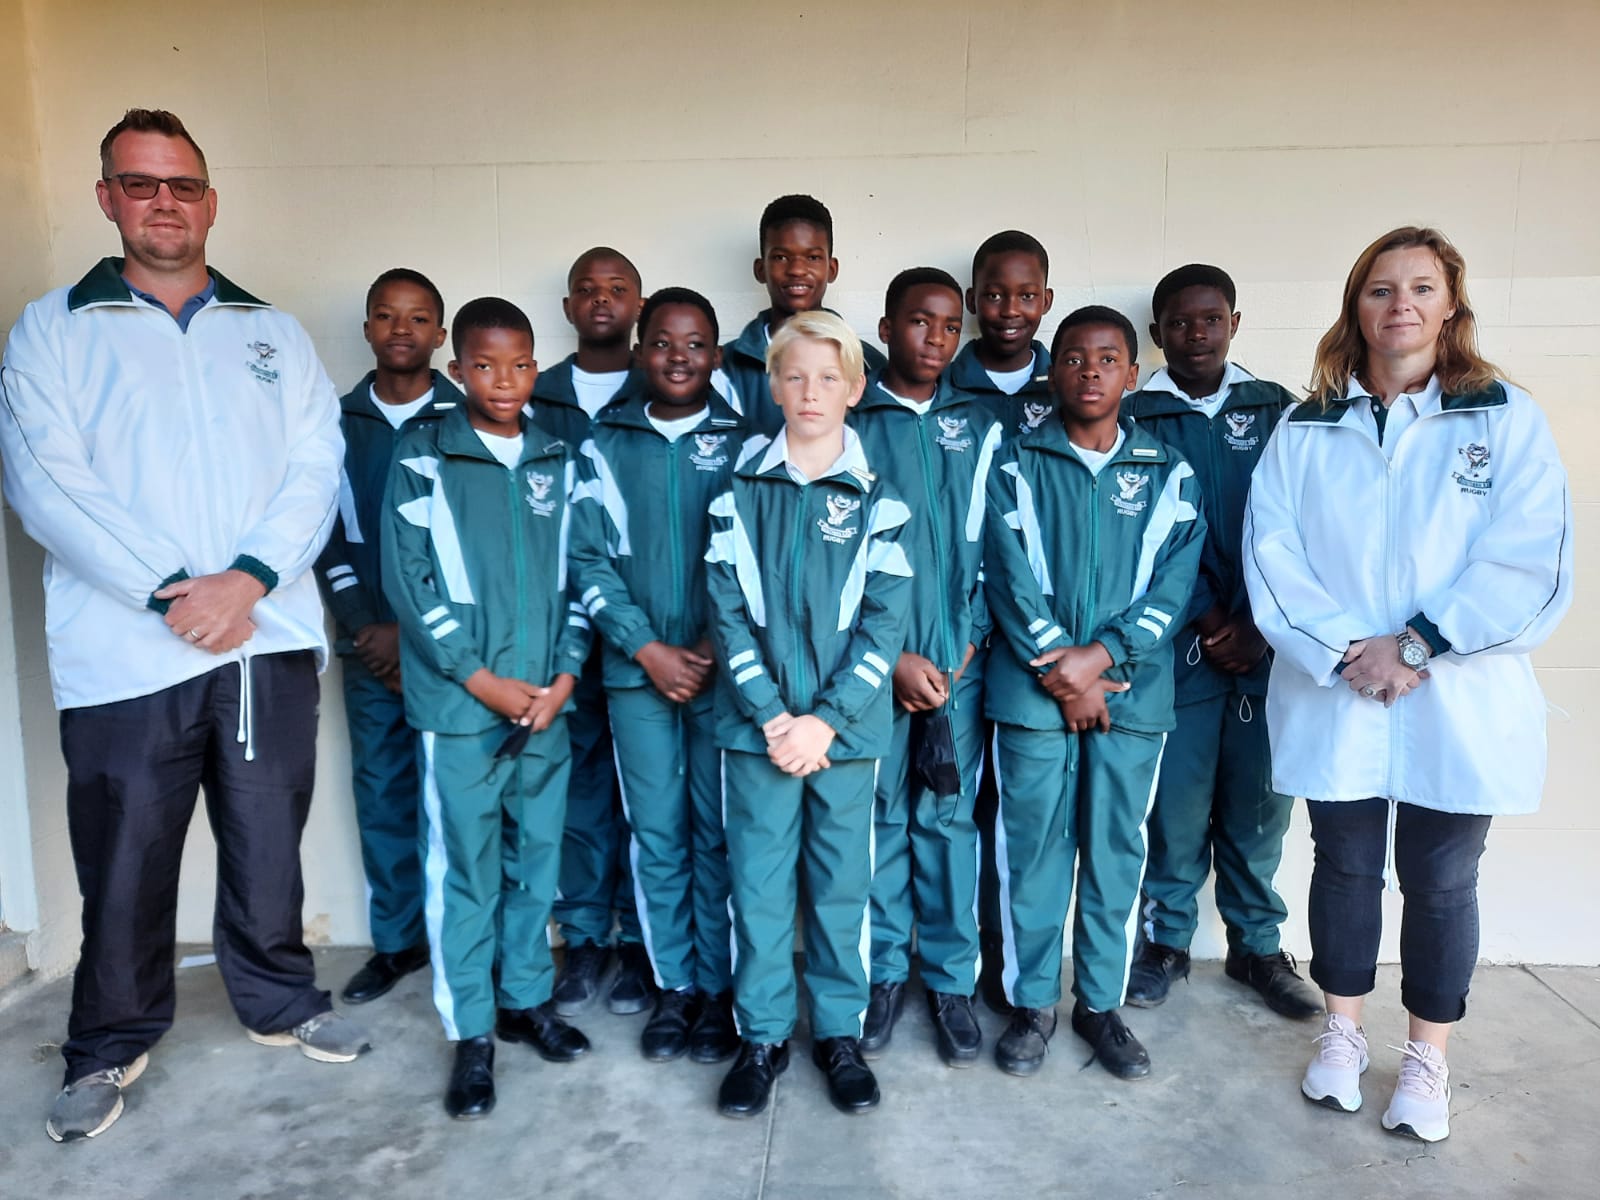 Boys selected for SKZN with Mr D van Dyk and Mrs L du Randtjpeg